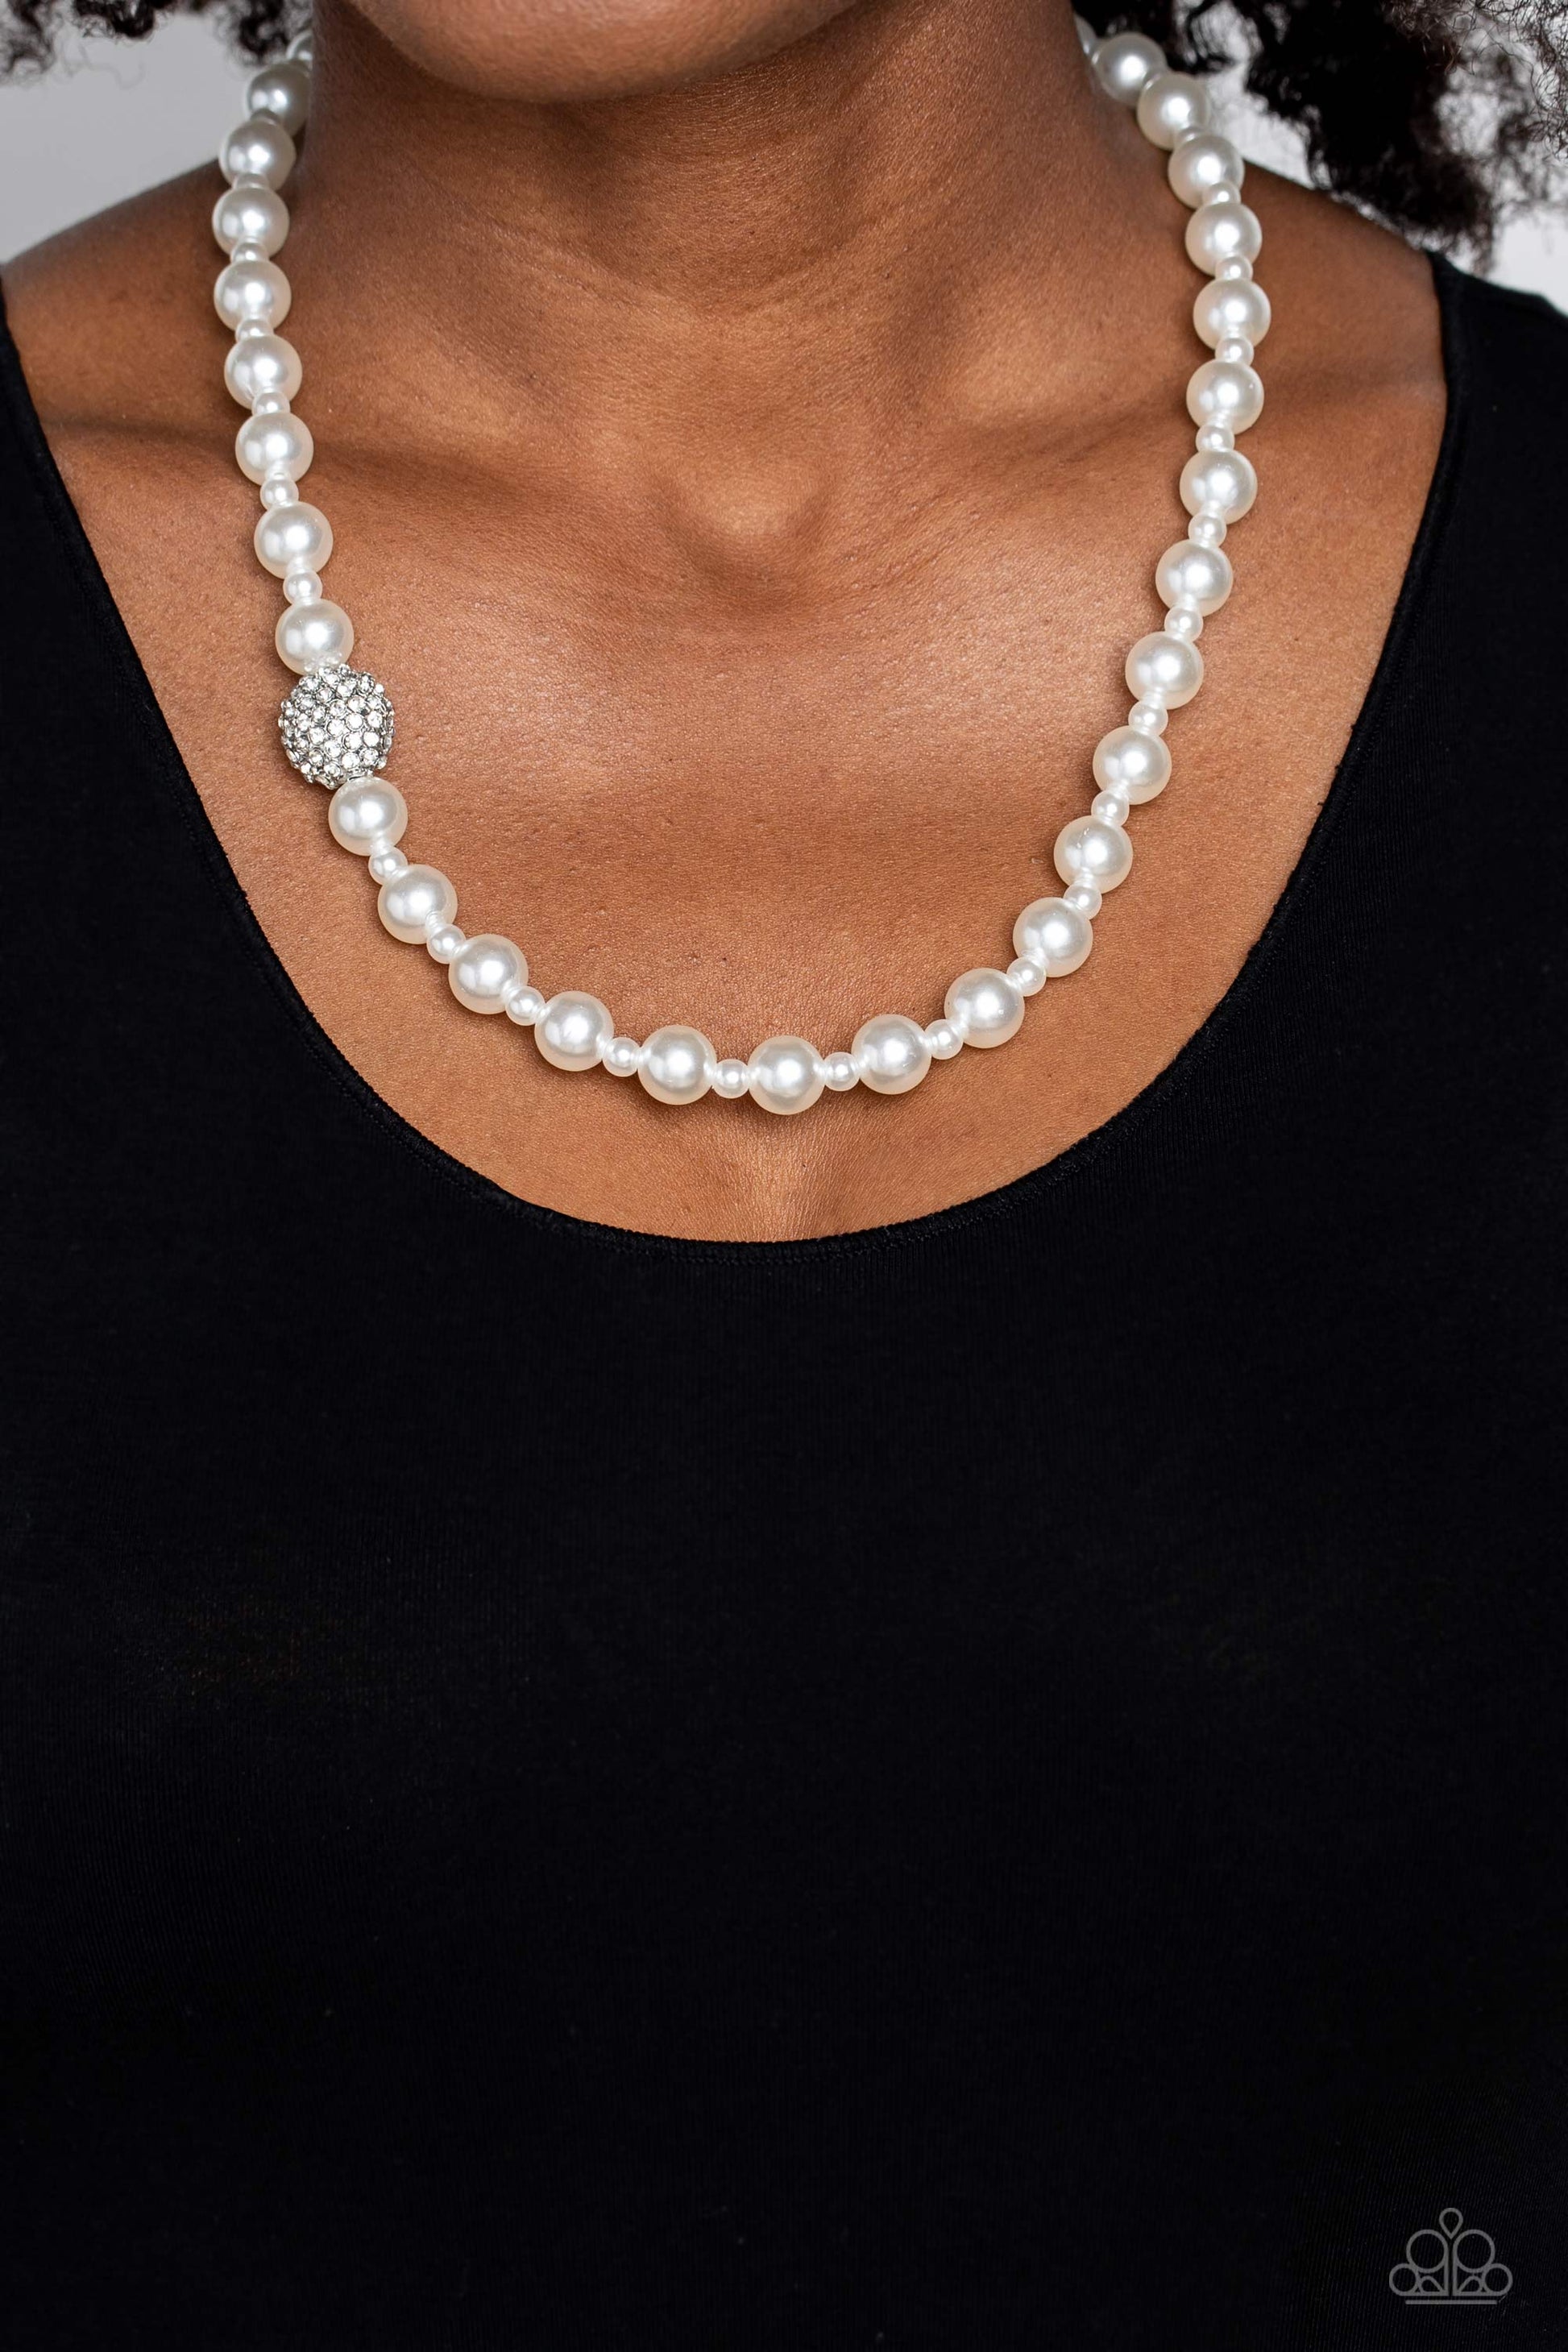 Paparazzi Accessories Countess Chic - White Strung along the entirety of an invisible wire, classic white pearls in varying sizes coalesce down the neckline for a refined finish. Adding to the elegant design, a sparkly white rhinestone-encrusted silver or